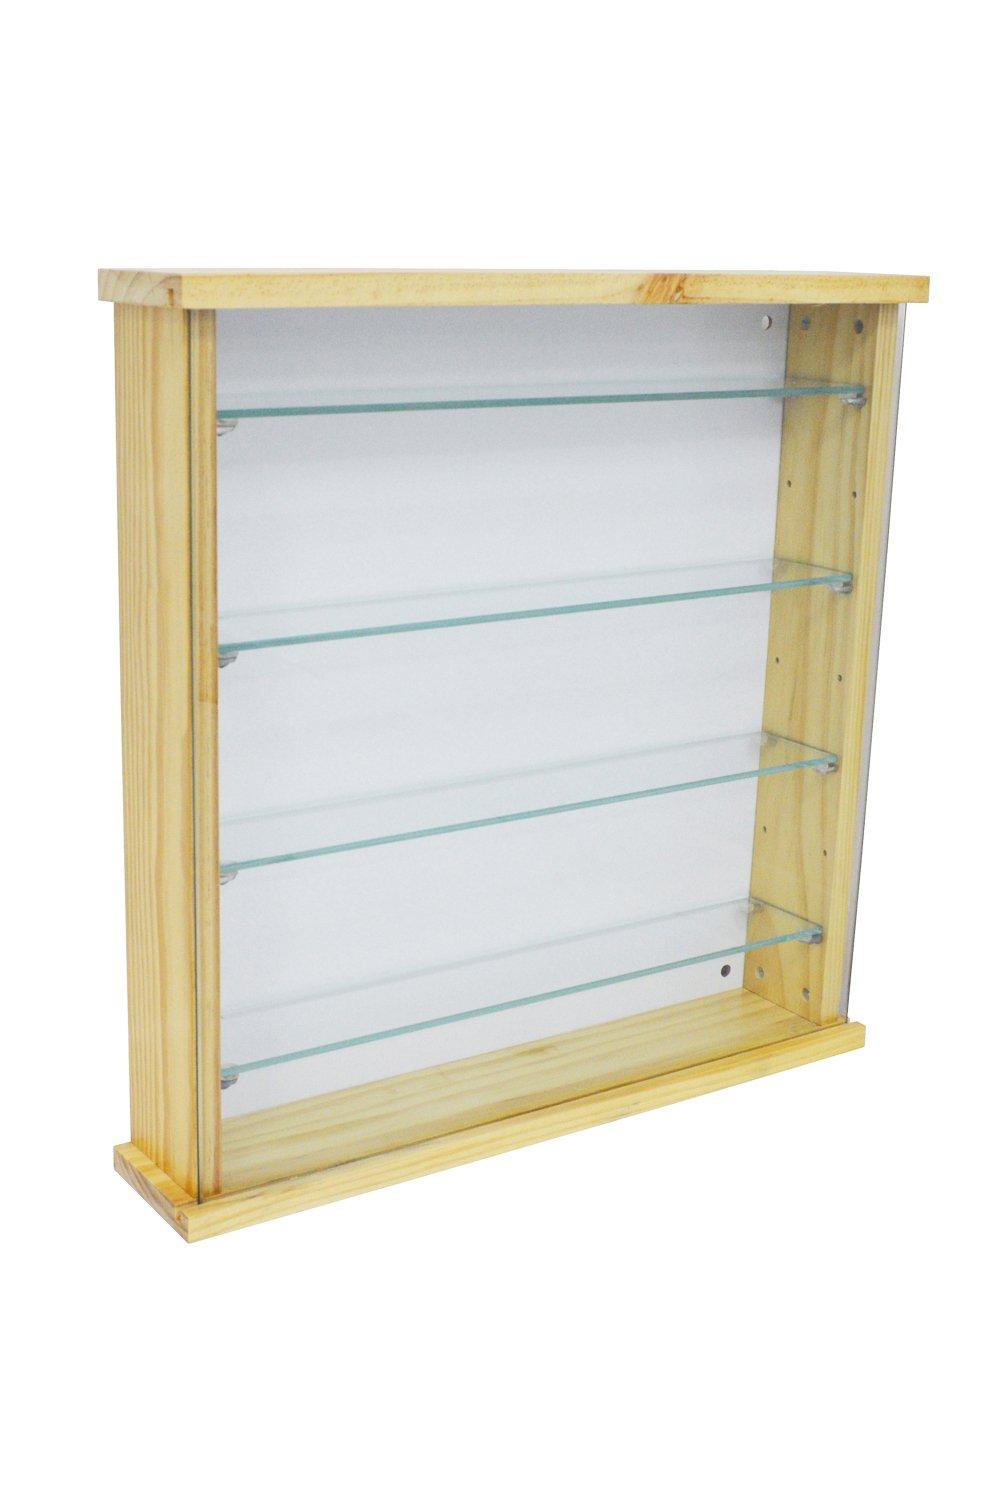 'Exhibit'  Solid Wood 4 Shelf Glass Wall Display Cabinet  Natural Pine